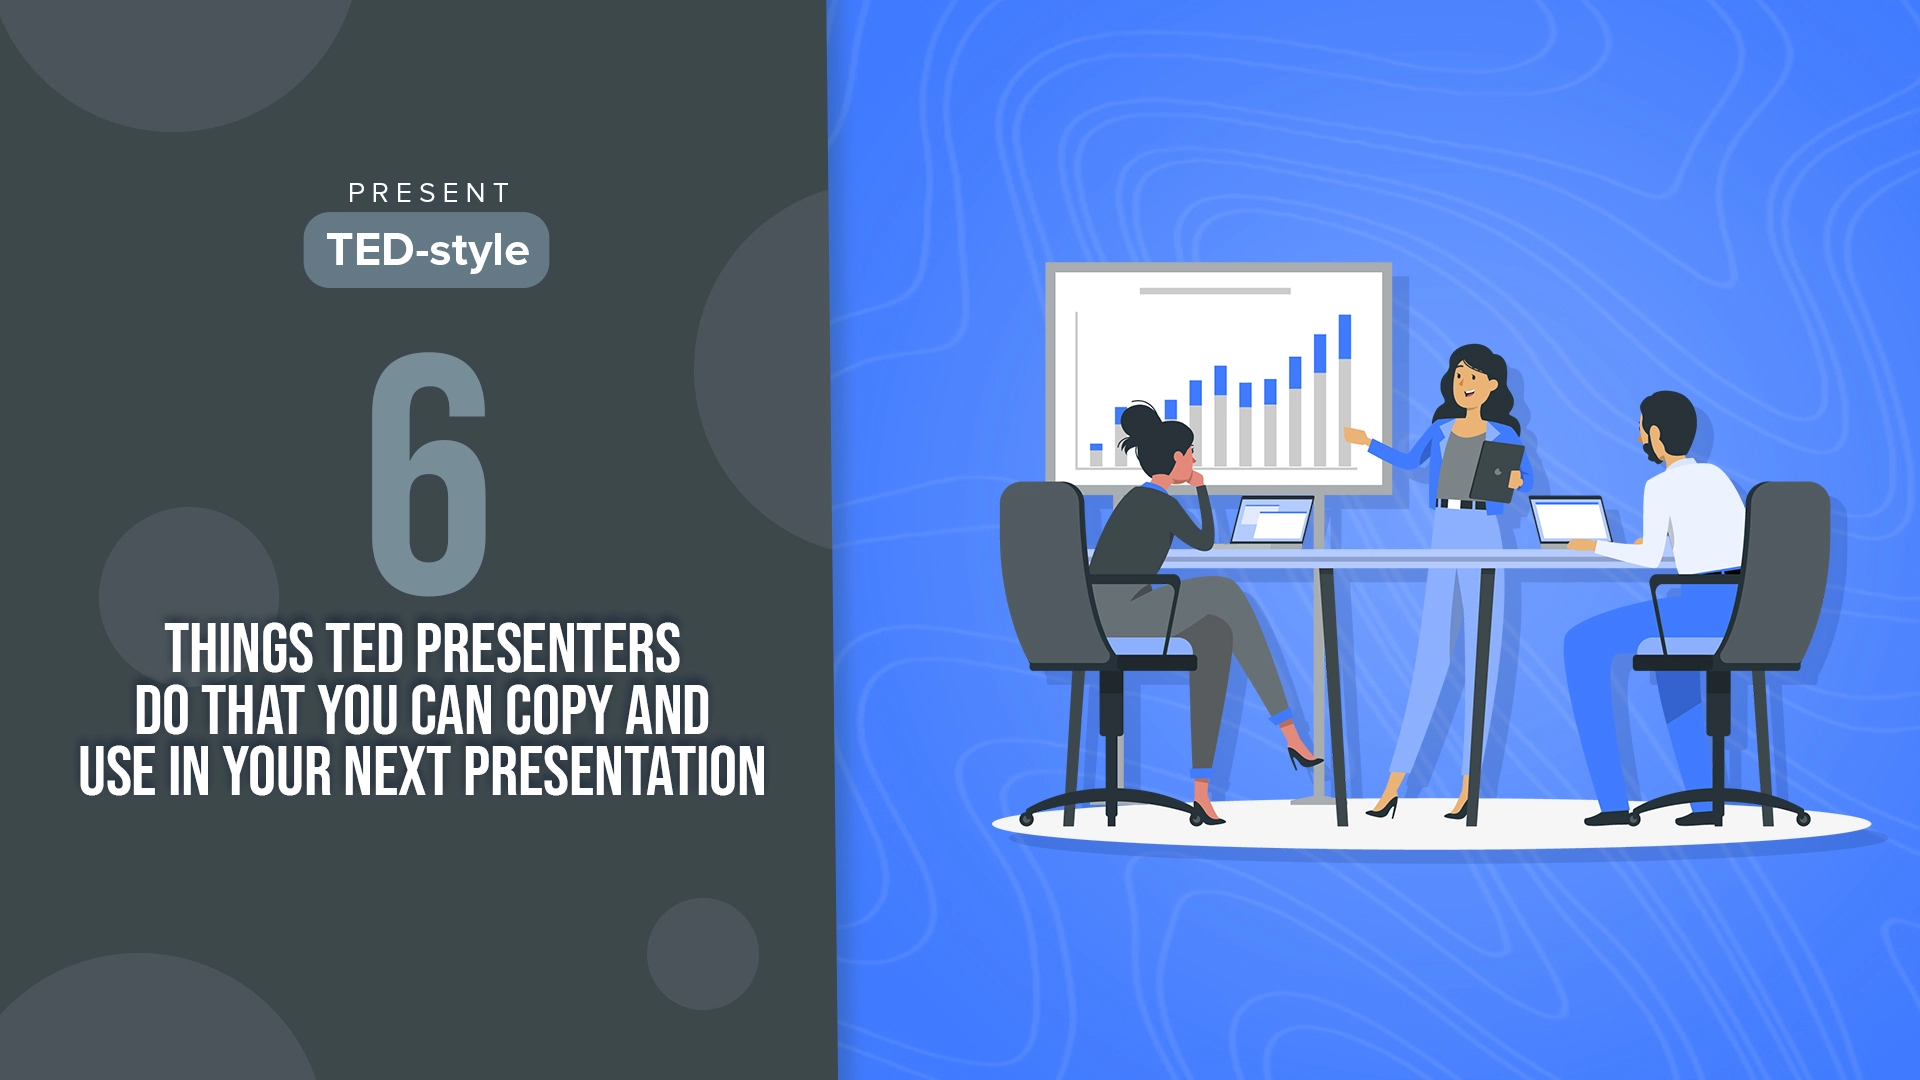 Present TED-style: Six Things TED Presenters Do That You Can Copy And Use In Your Next Presentation